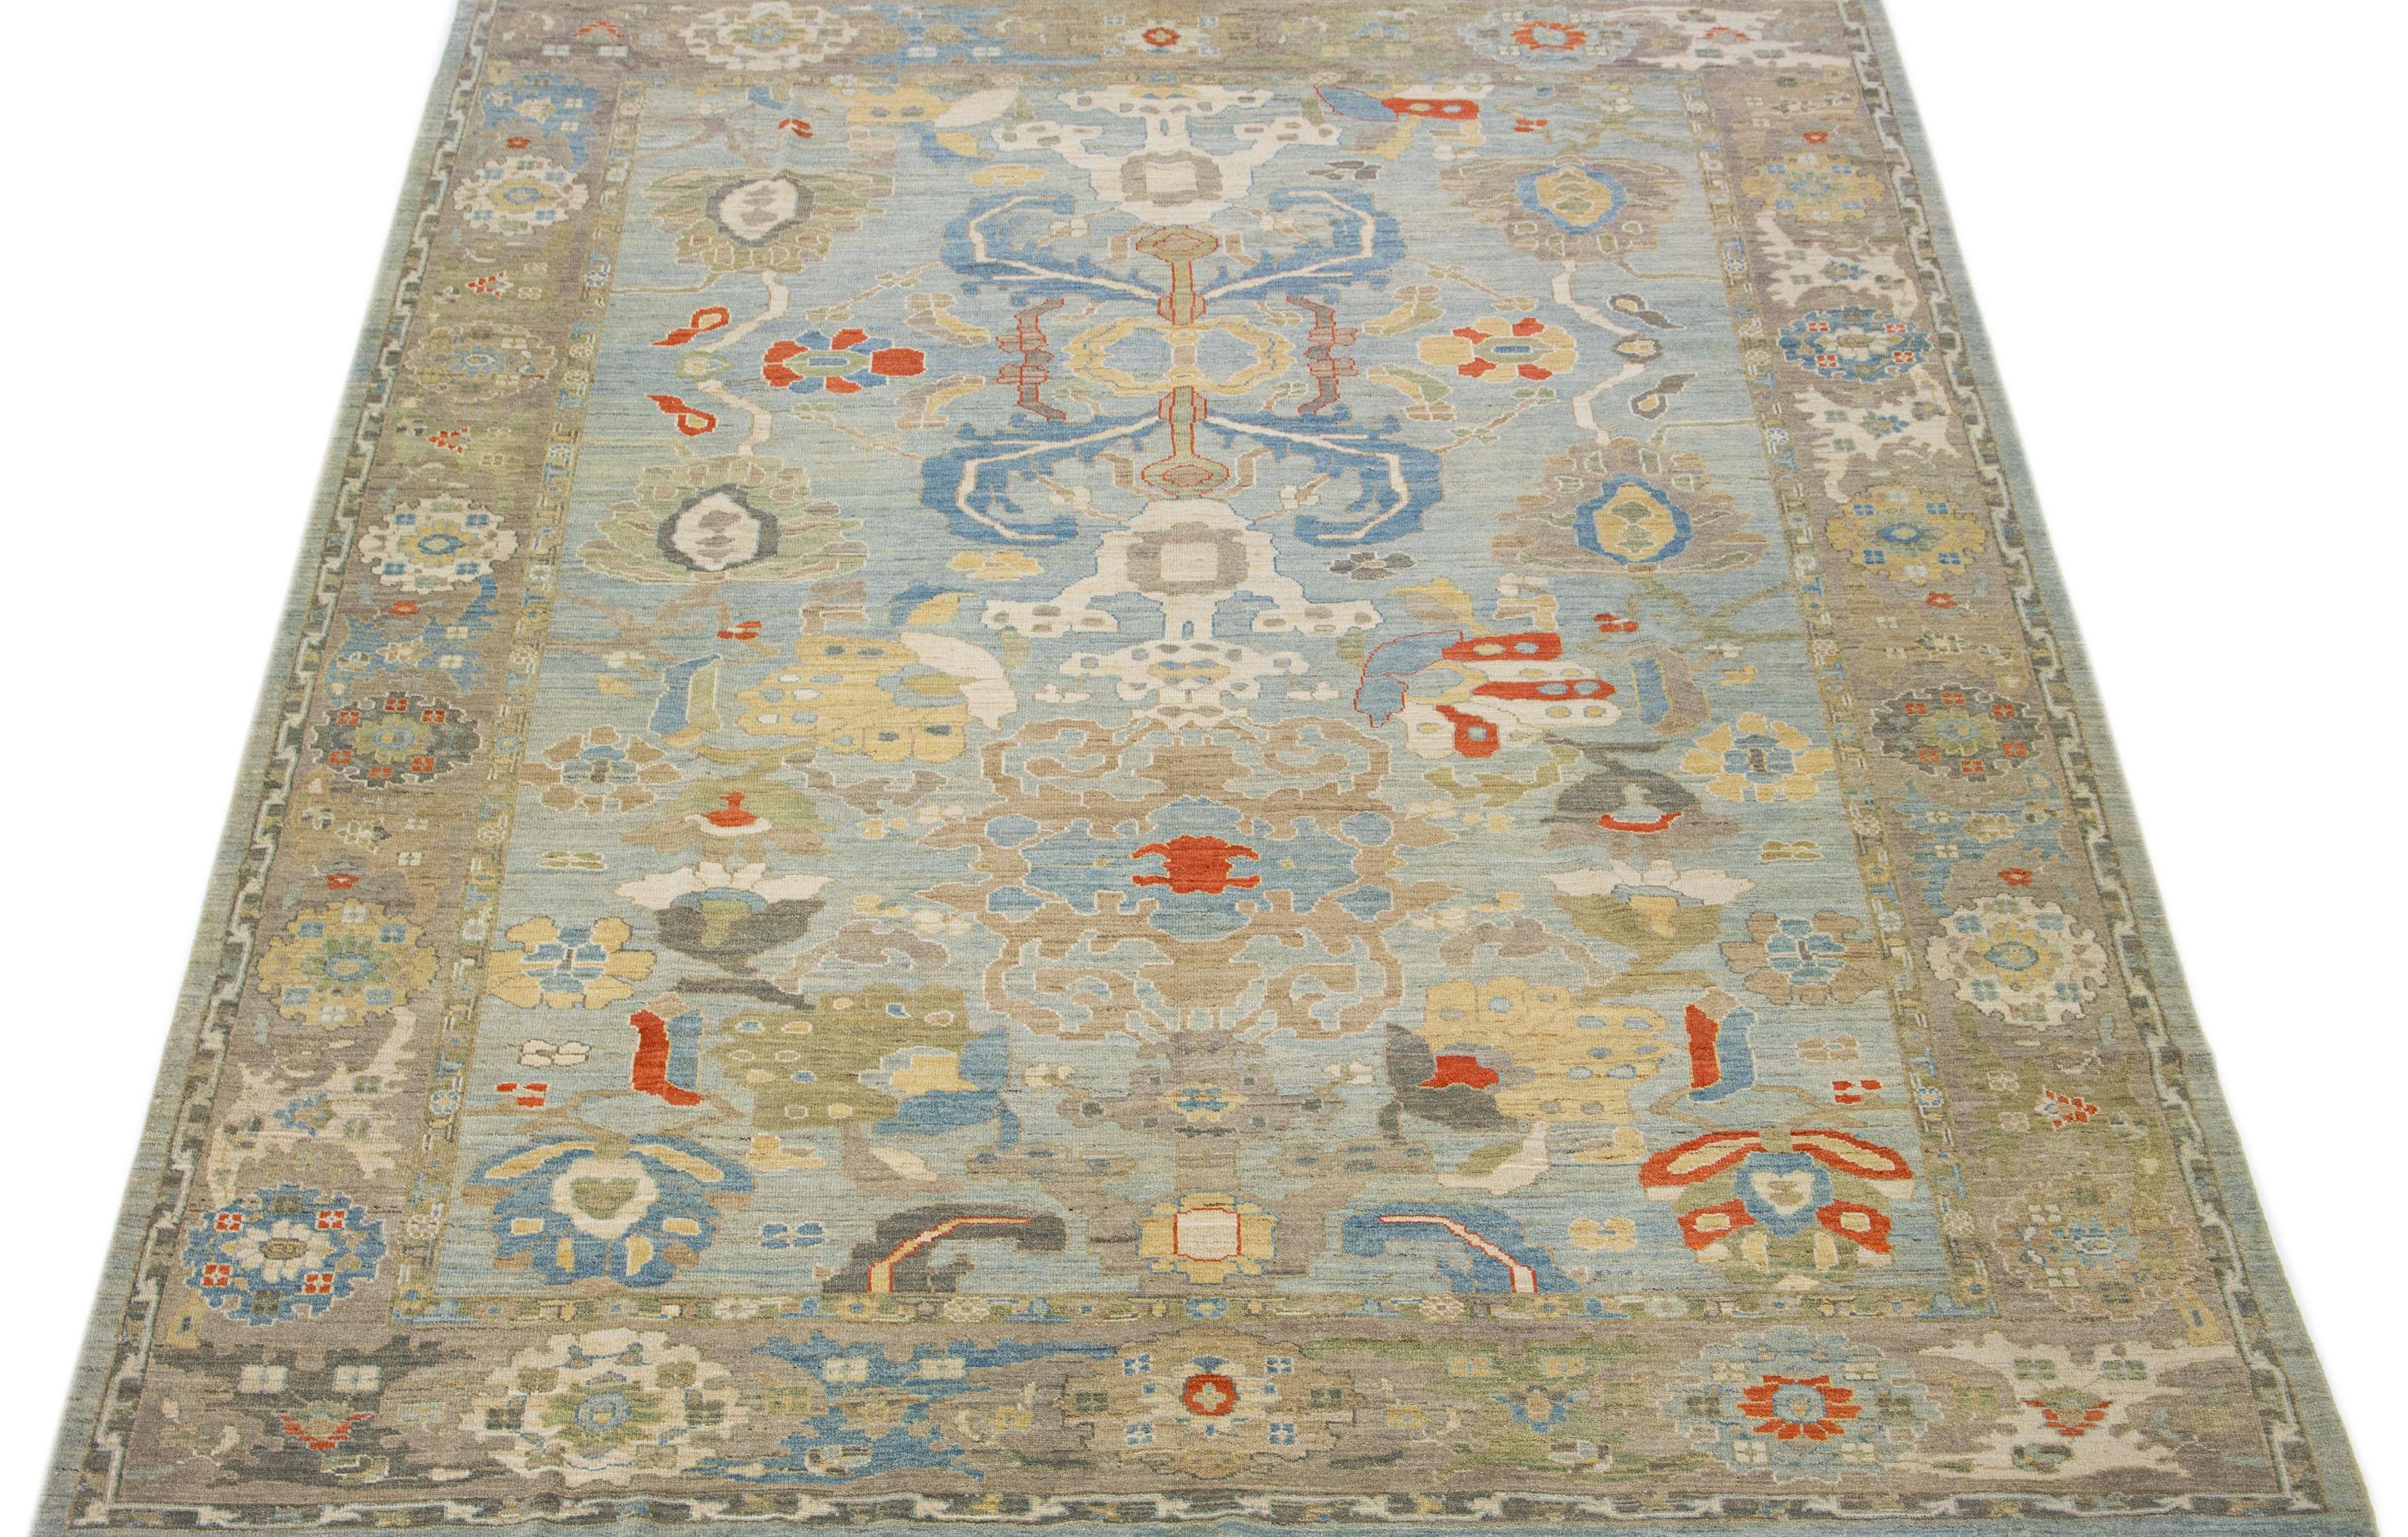 This contemporary take on the traditional Sultanabad style is showcased in an exquisite hand-knotted wool rug with a striking light blue color. An intricately designed frame accentuates its all-over floral motif, adorned with multicolored accents